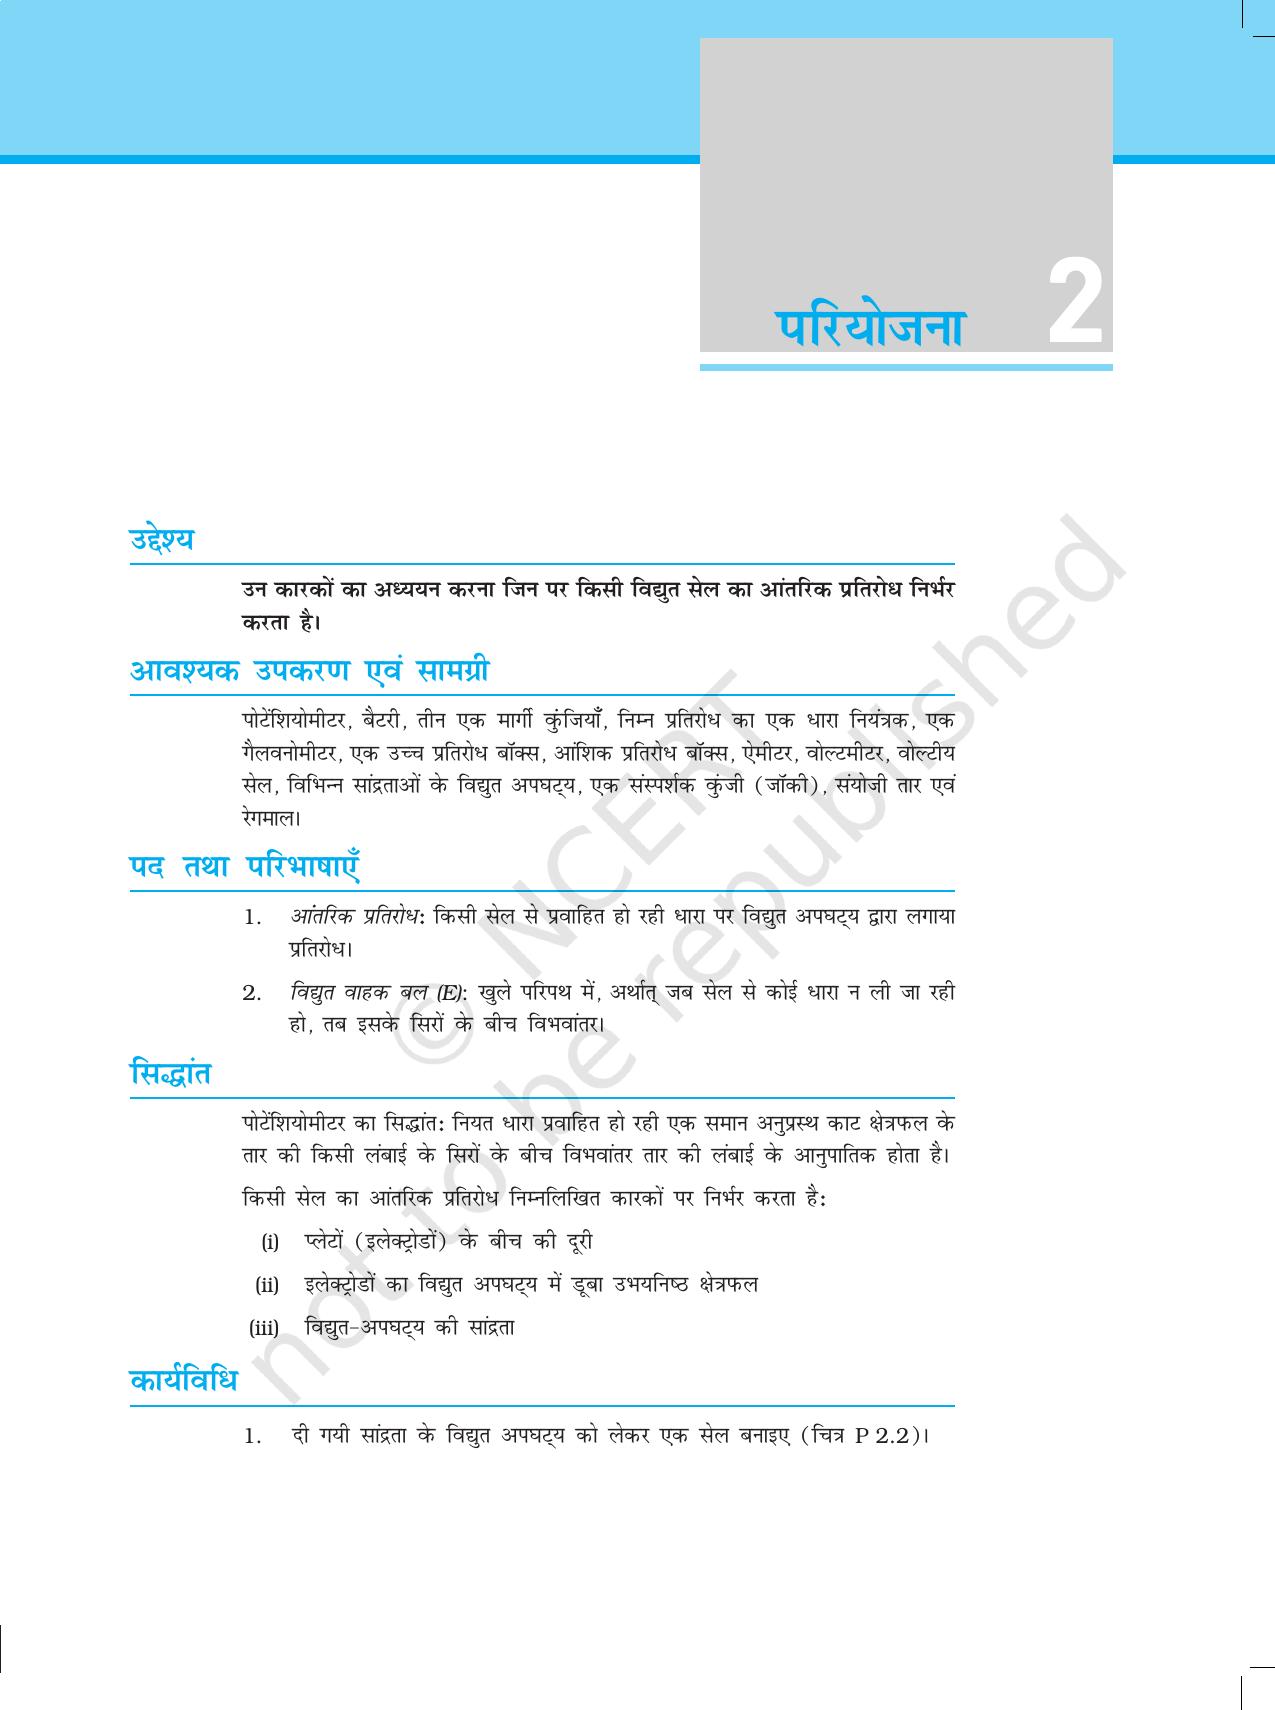 NCERT Laboratory Manuals for Class XII भौतिकी - परियोजना (1 - 7) - Page 5